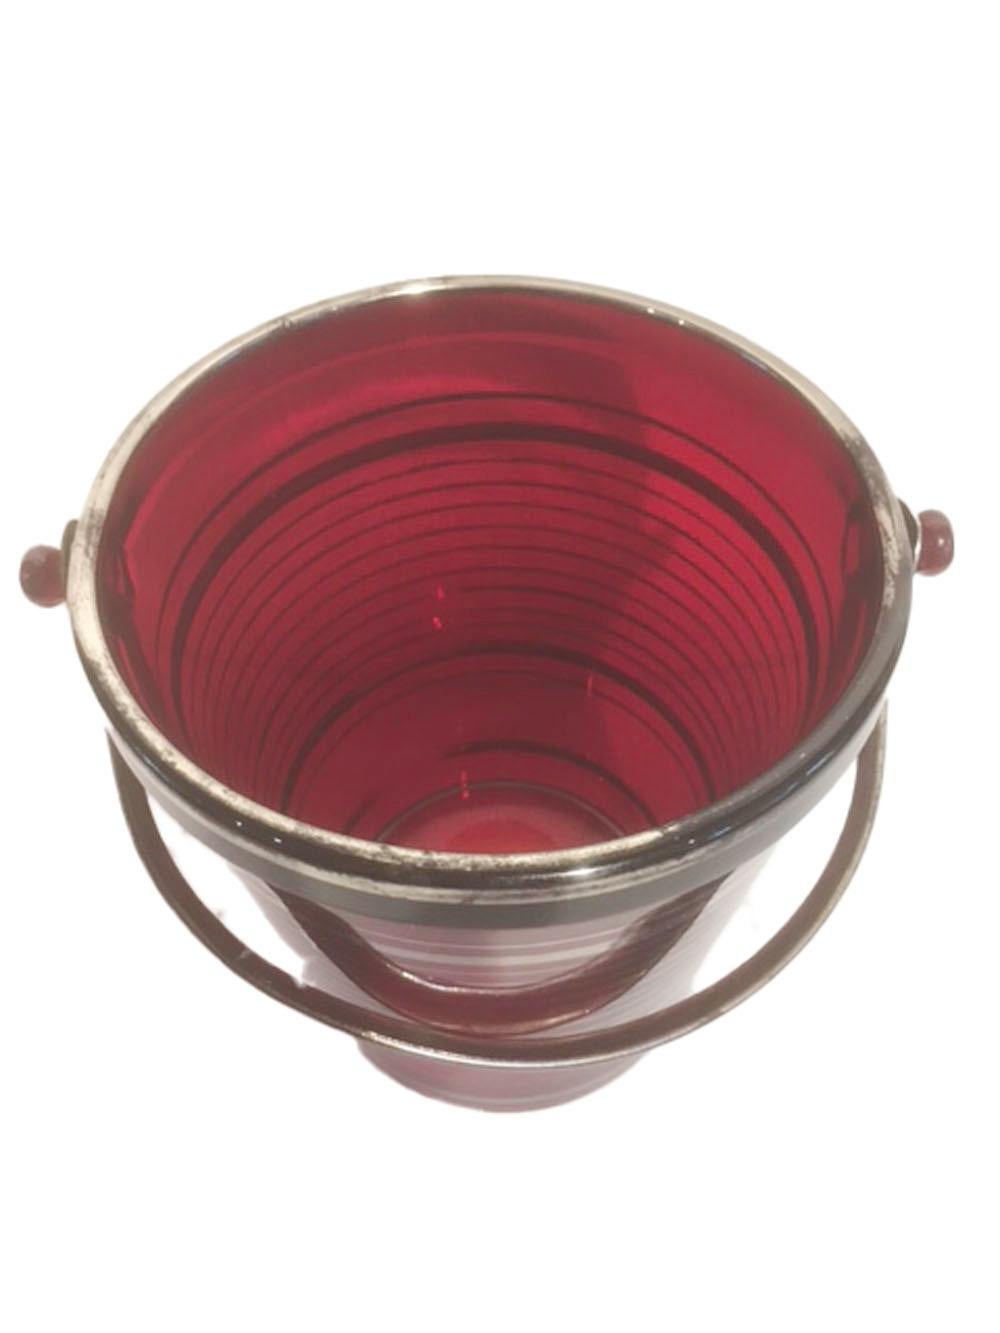 Art Deco deep red glass ice bucket with applied silver bands. The tapering pail form bucket has a raised rim with molded glass lugs where the metal handle attaches.